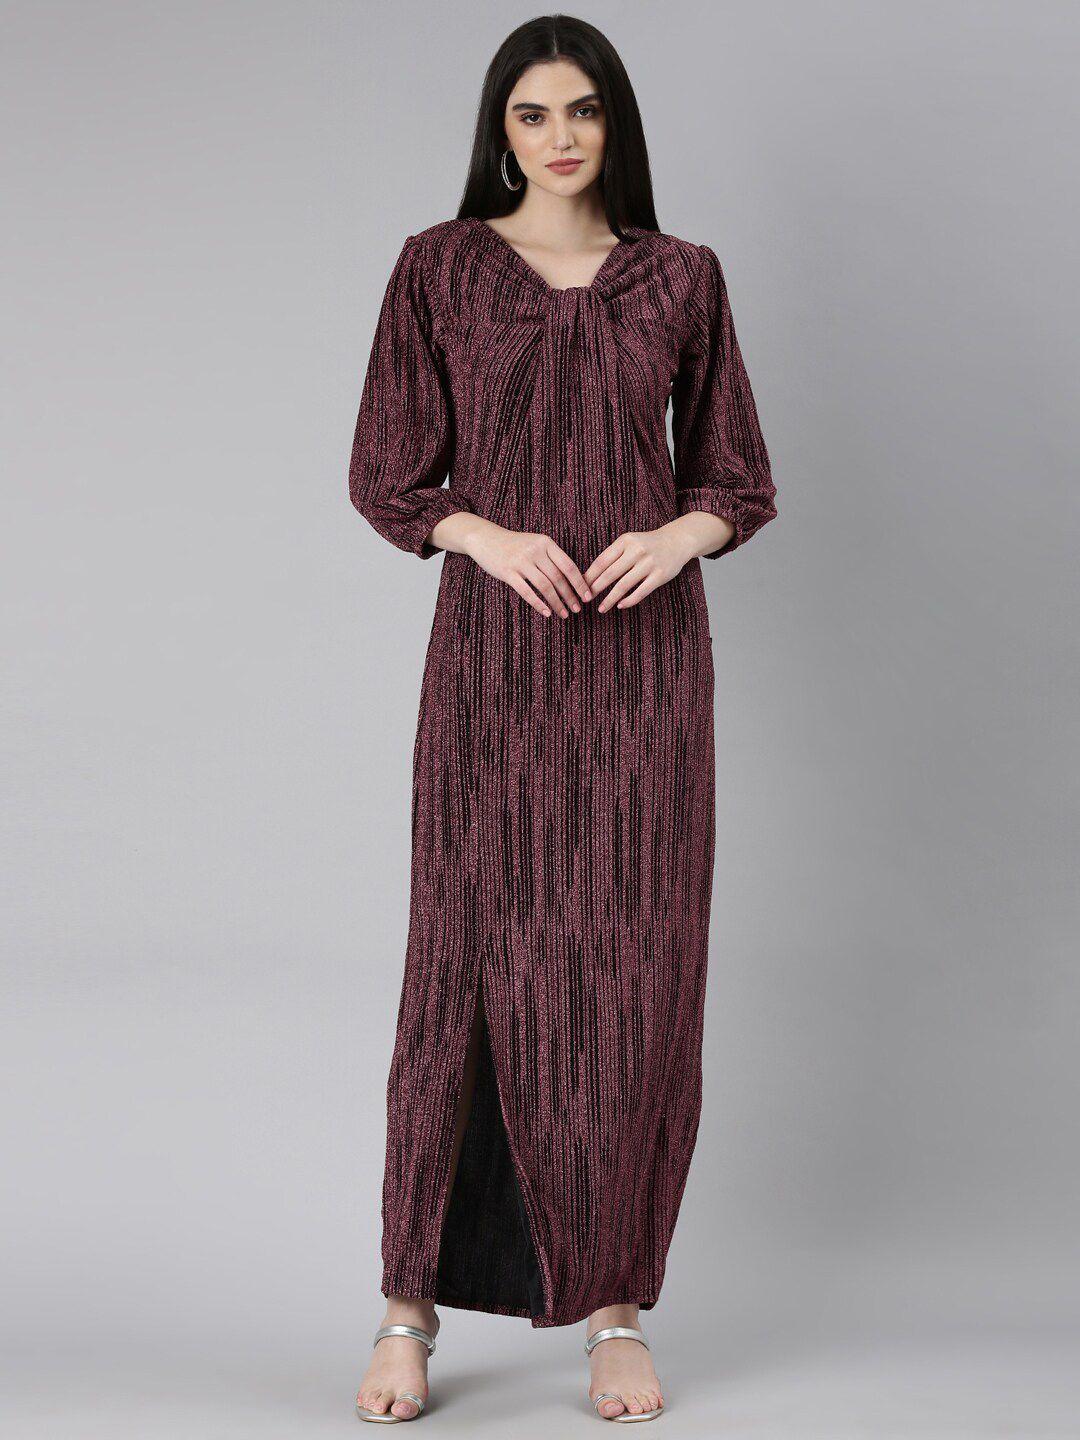 showoff self designed cut-out detailed v-neck puff sleeves maxi dress